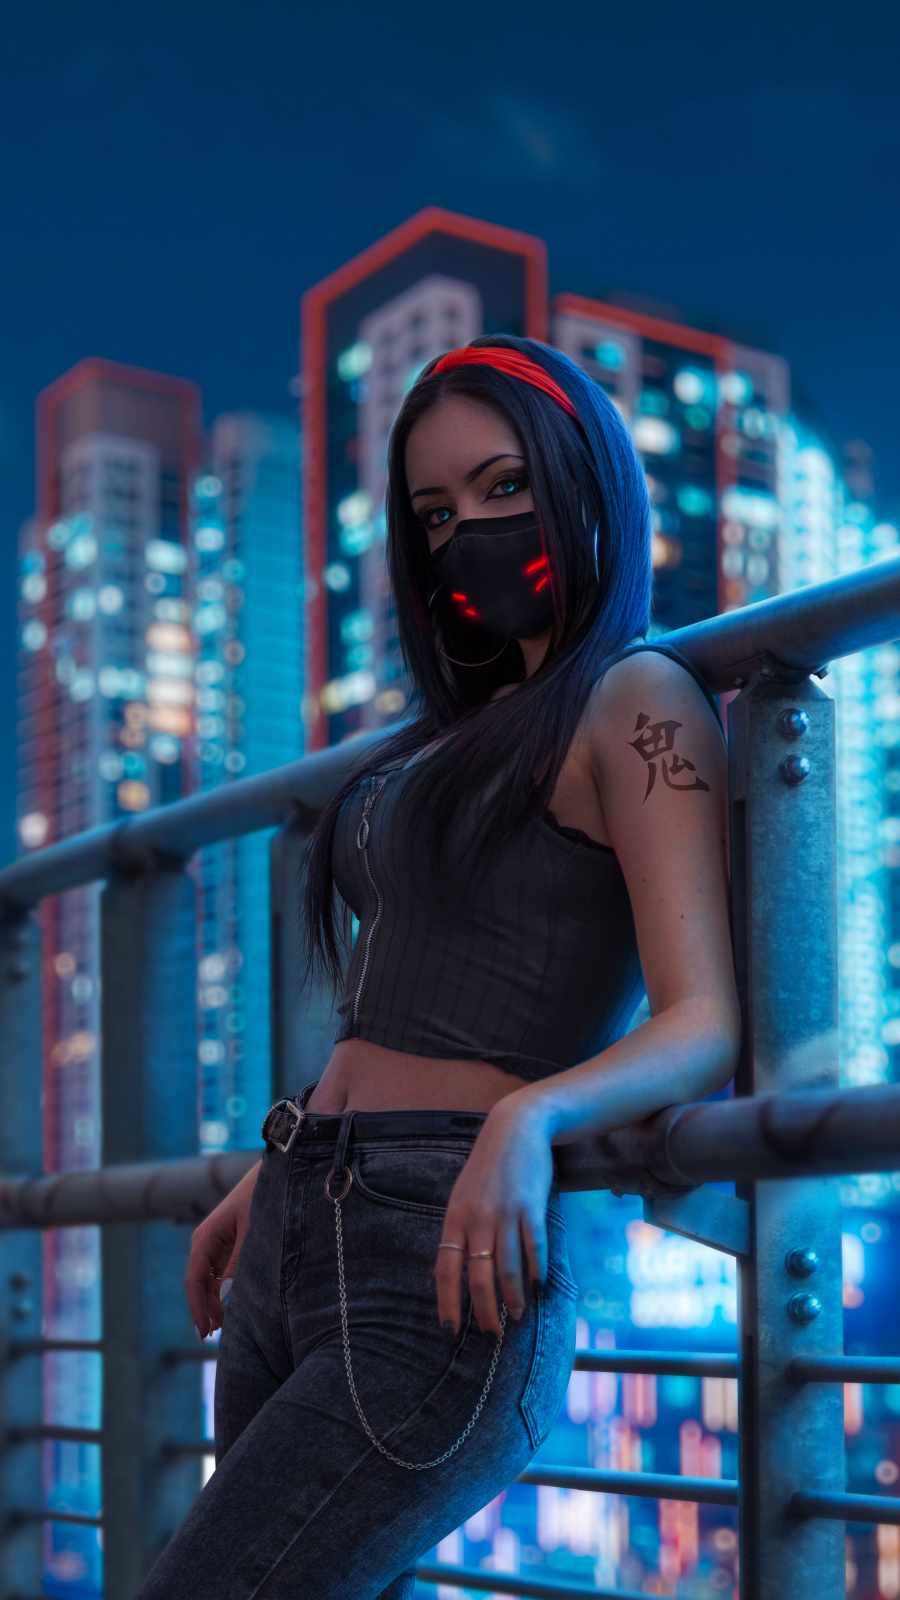 Masked Girl in Night iPhone Wallpaper